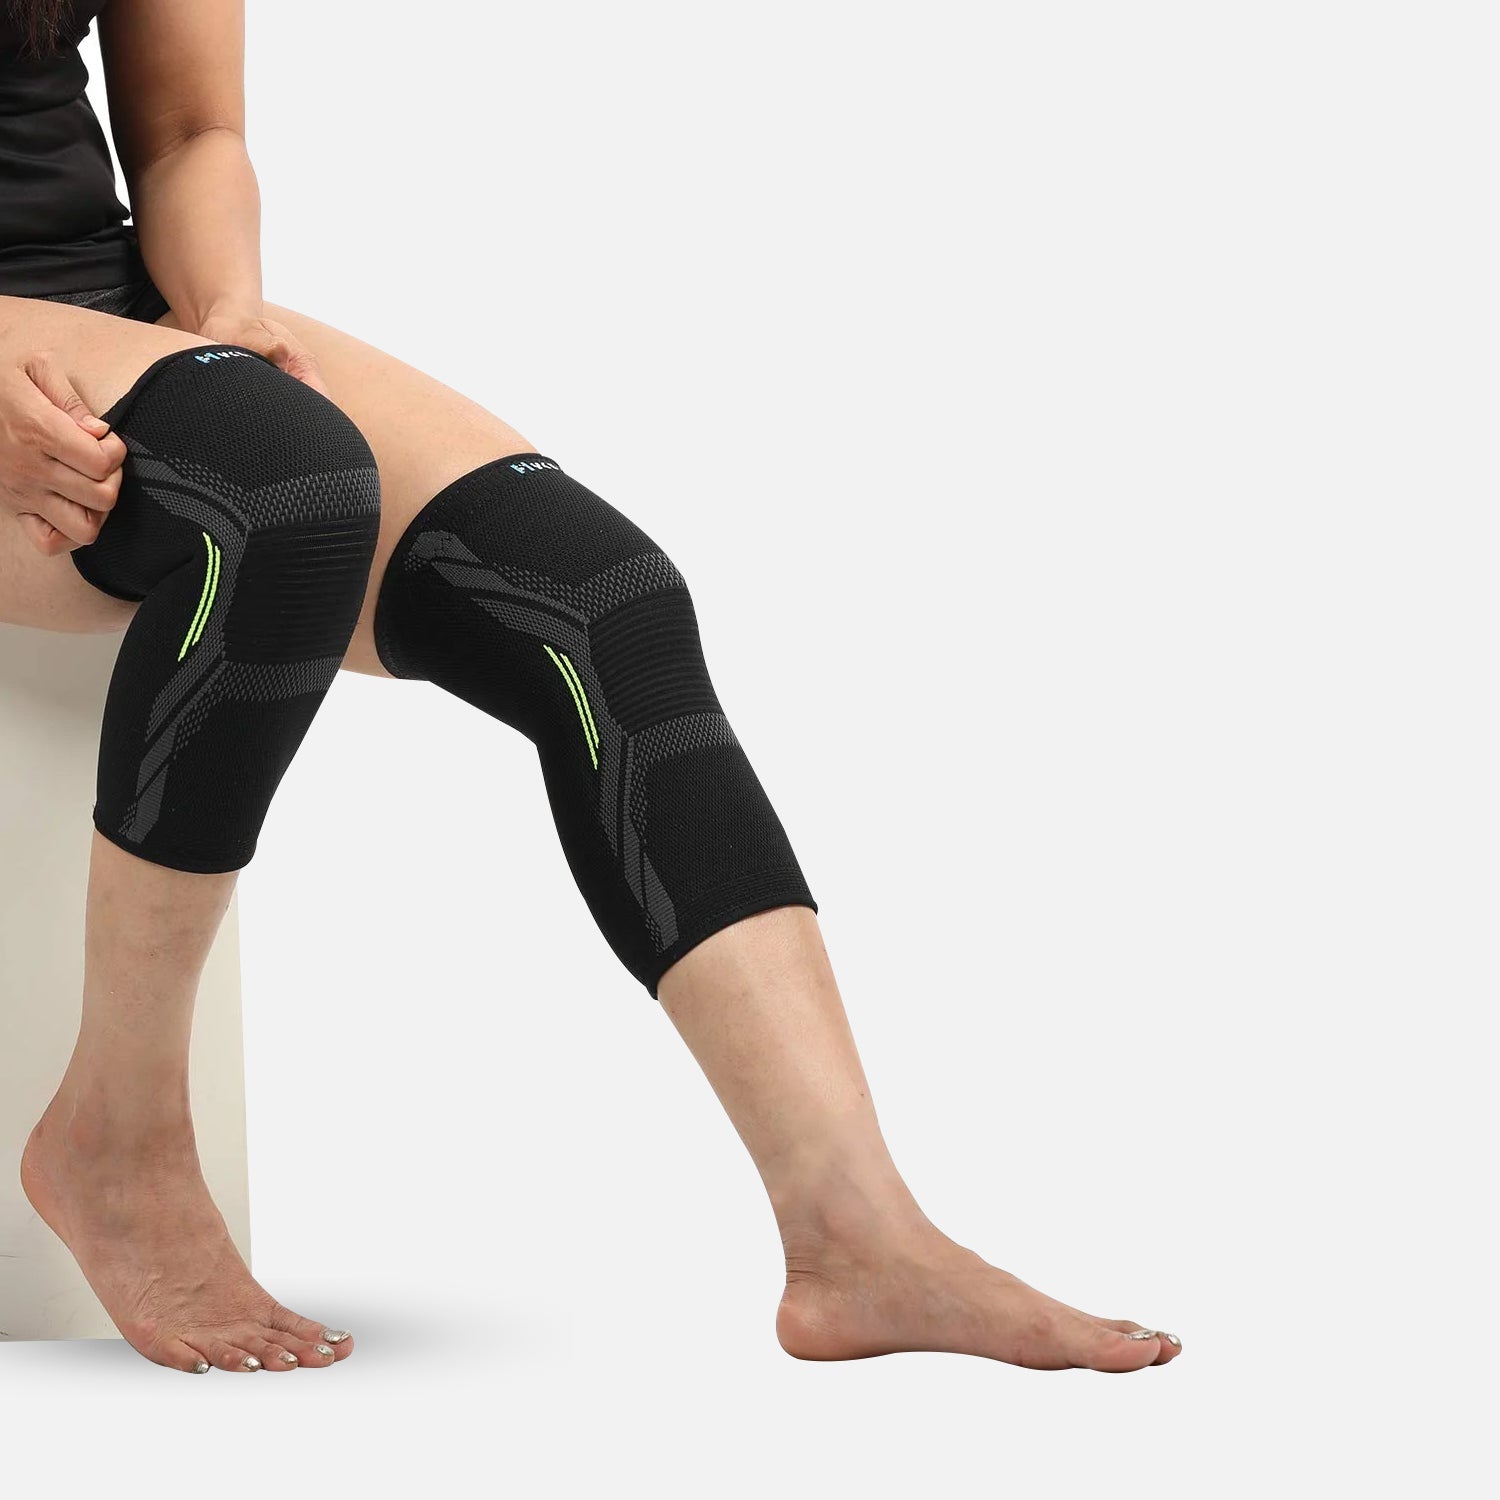 Buy Best Knee Compression Sleeve for Running & Squatting – Hykes